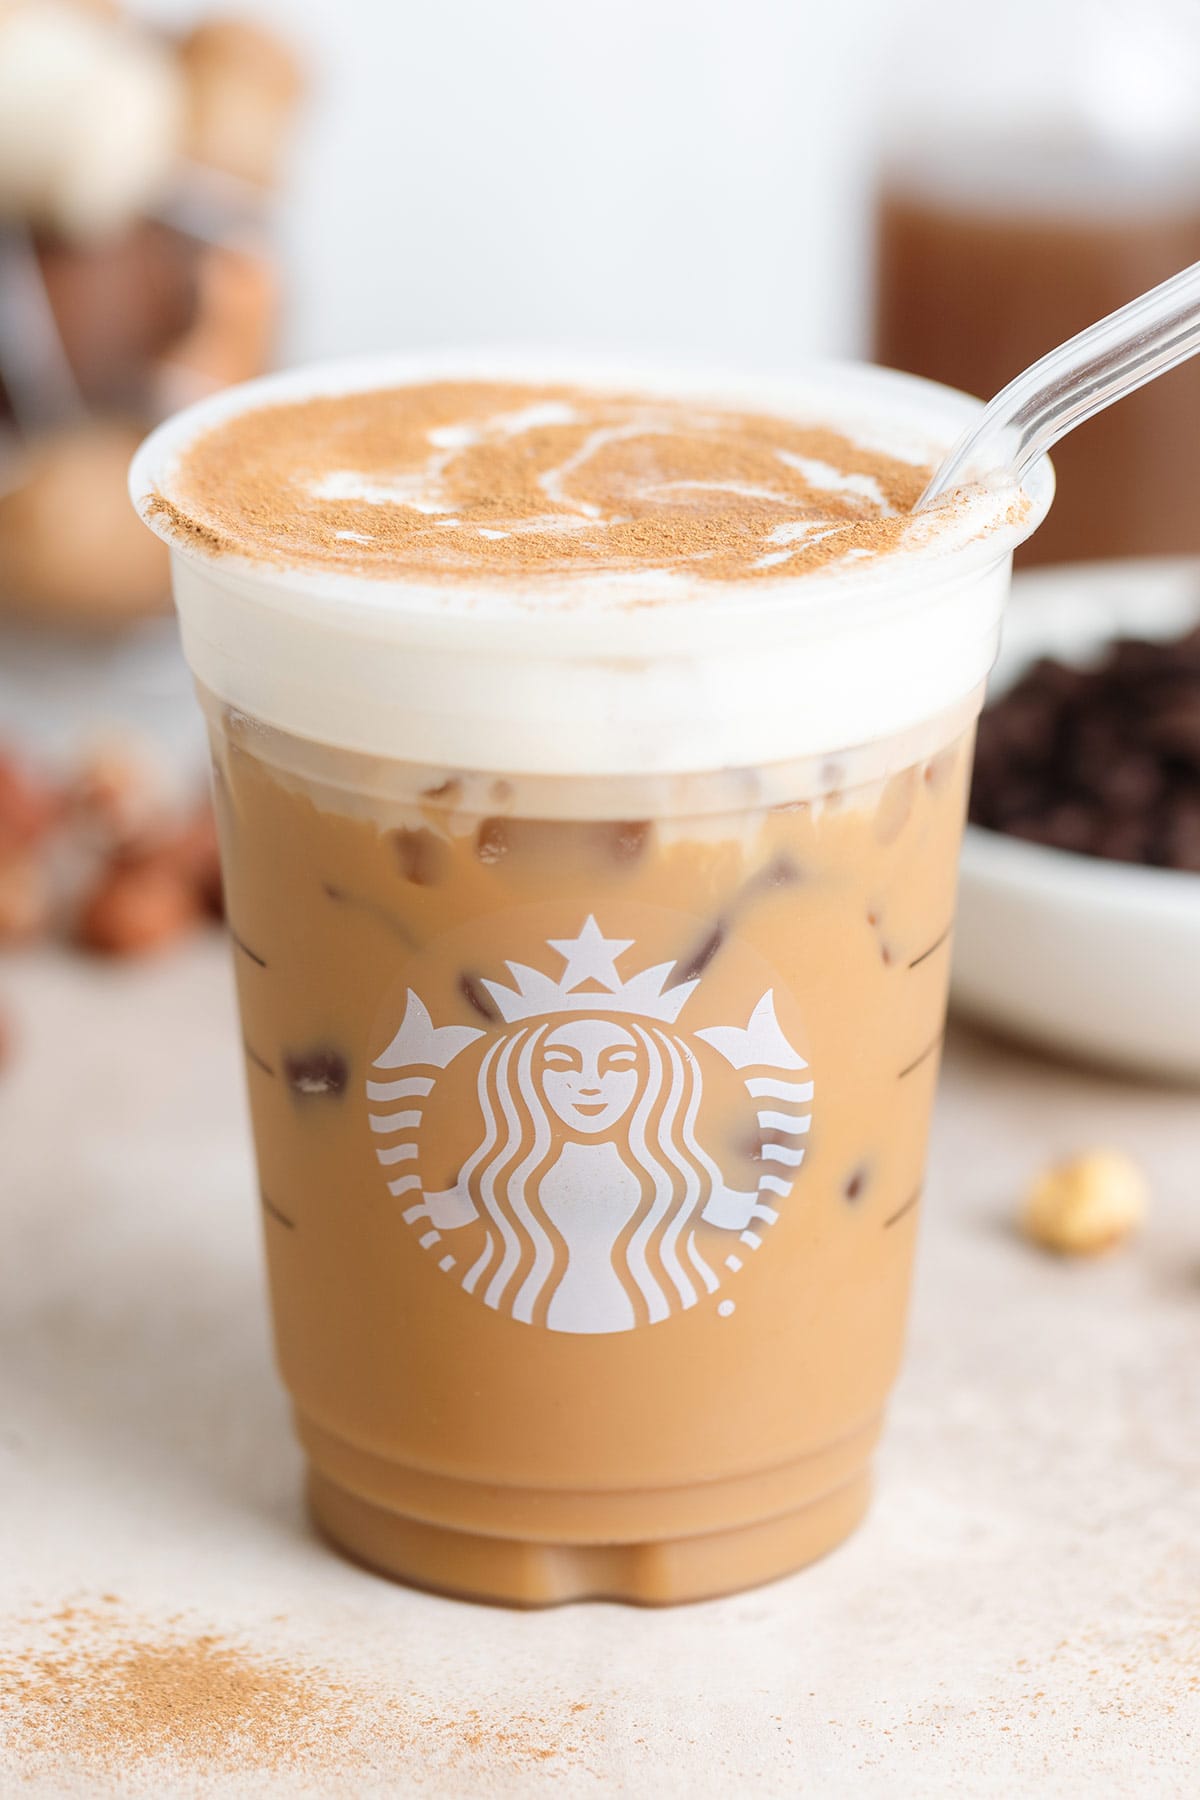 A plastic Starbucks cup with iced latte with frothy milk and a sprinkle of cinnamon with a glass straw on the right side of the cup.